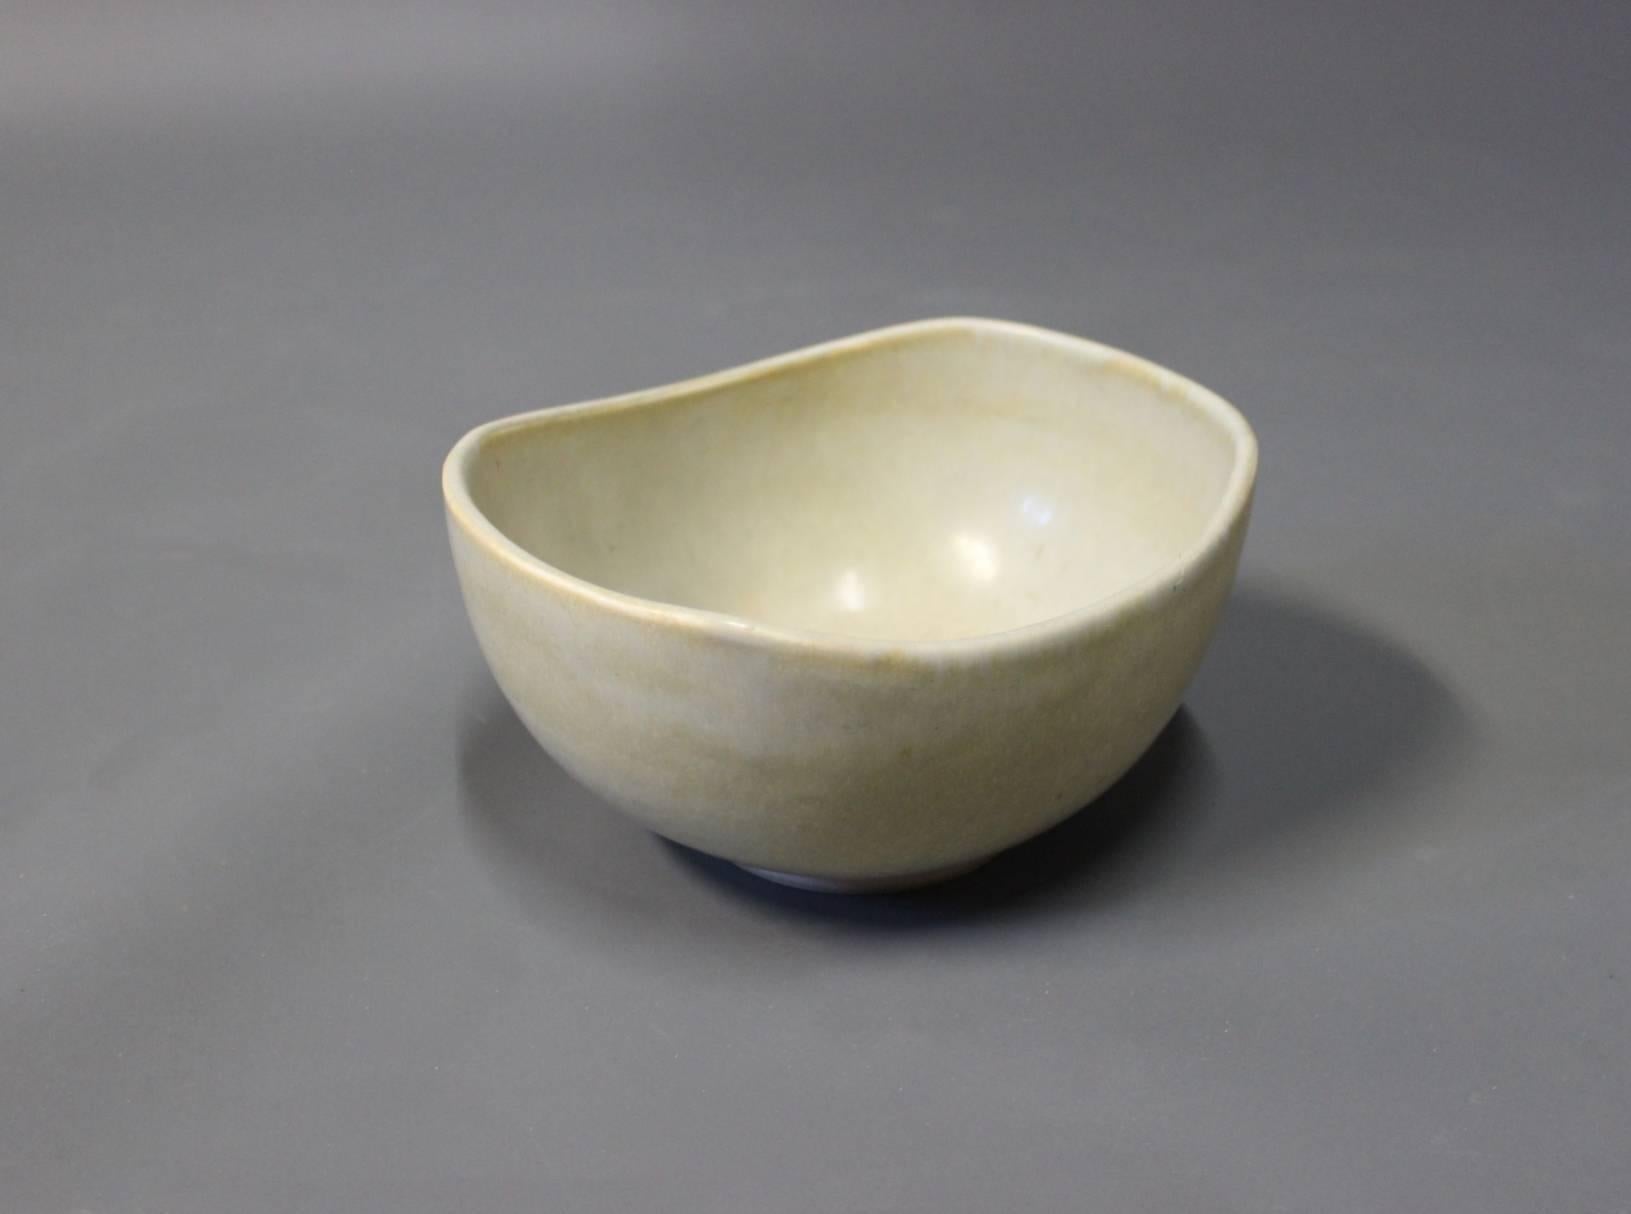 Small ceramic white glazed Saxbo bowl designed by Natalia Krebs in the 1940s. The bowl is in excellent condition and with the no. 188.